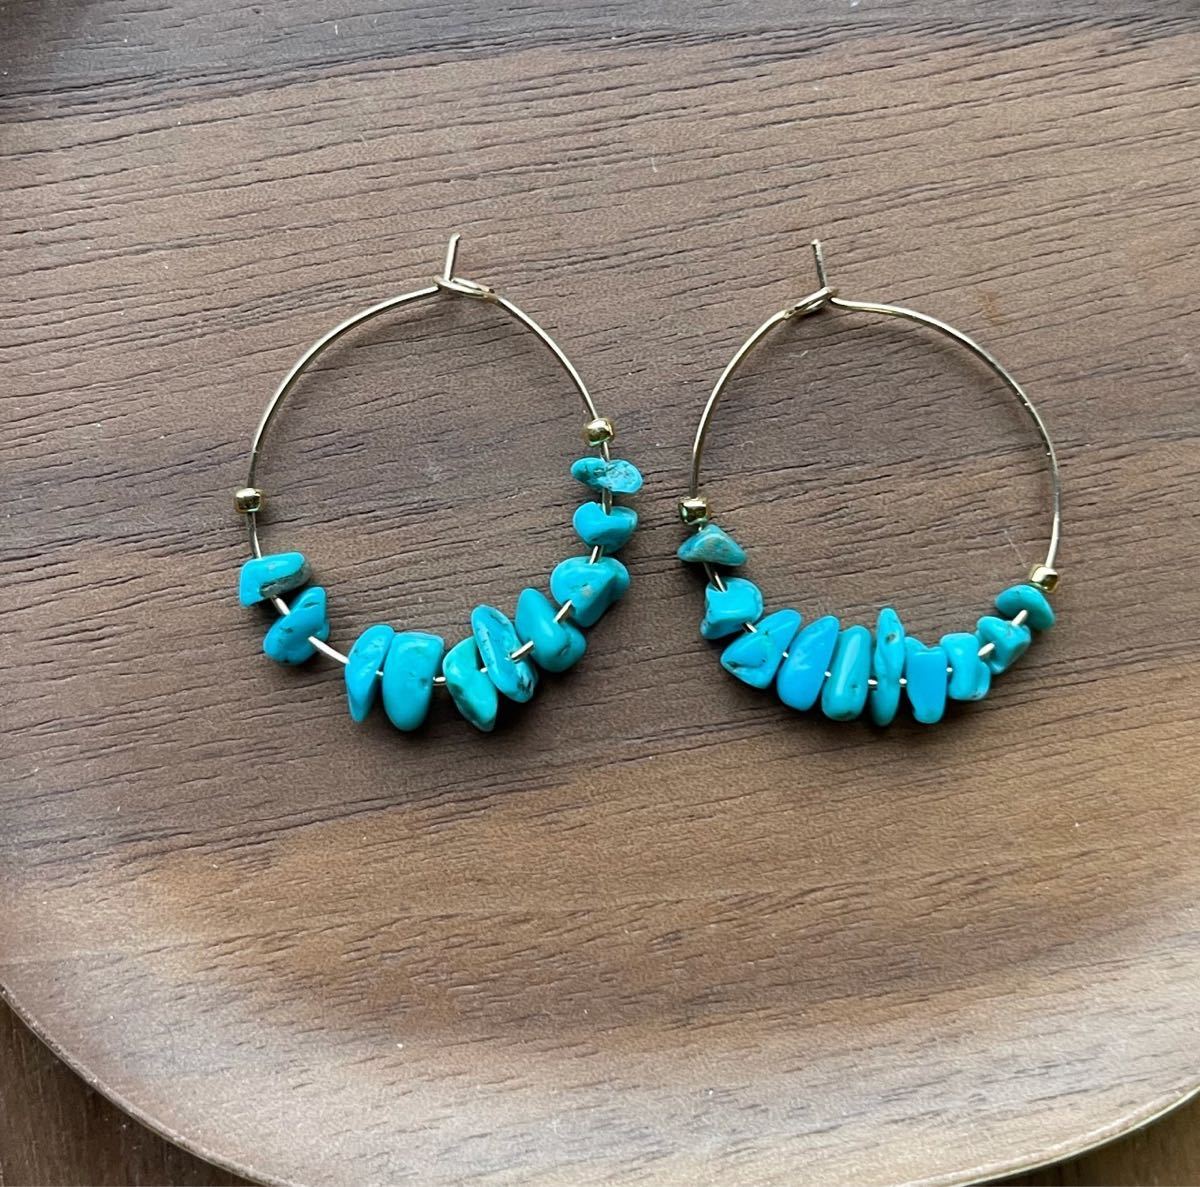 -SUI8- No.50 アリゾナ産スリーピングビューティーターコイズのフープピアス　35mm x 35mm 14kgf A turquoise hoop pierceEarring 14kgf_画像1